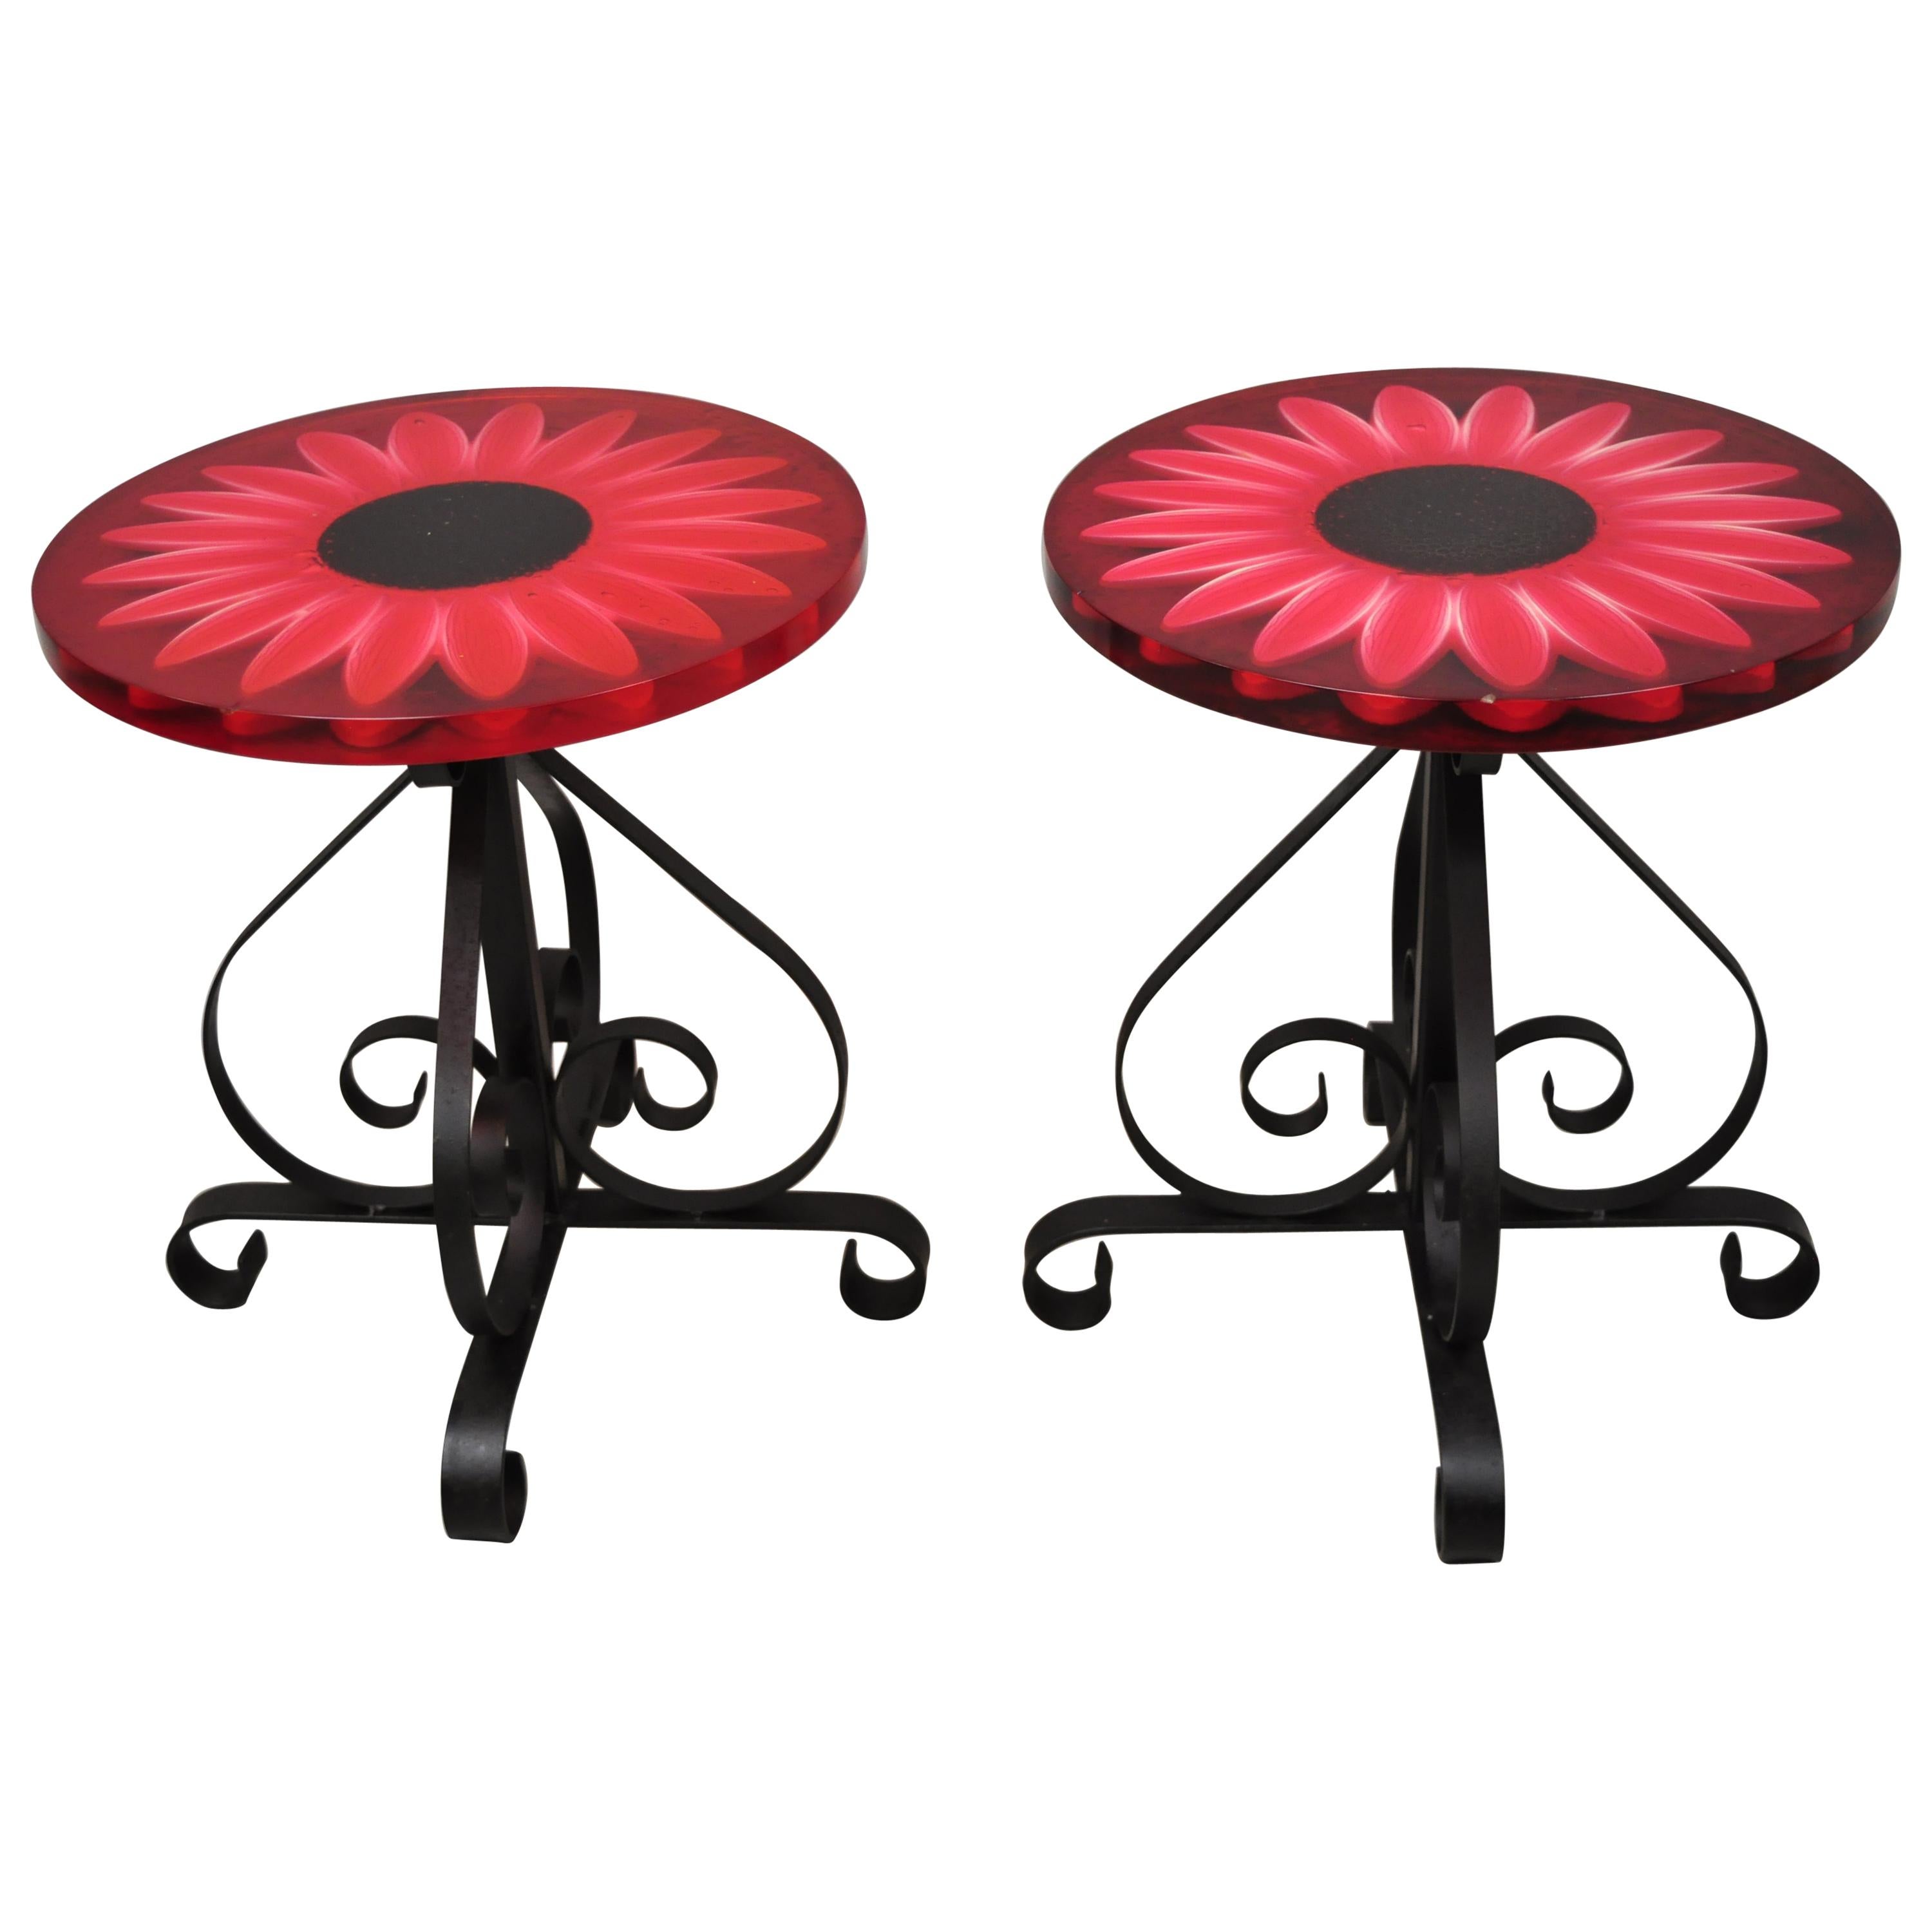 Vintage Wondermold Gamma Associates Red Resin Sun Flower Iron Side Tables, Pair For Sale